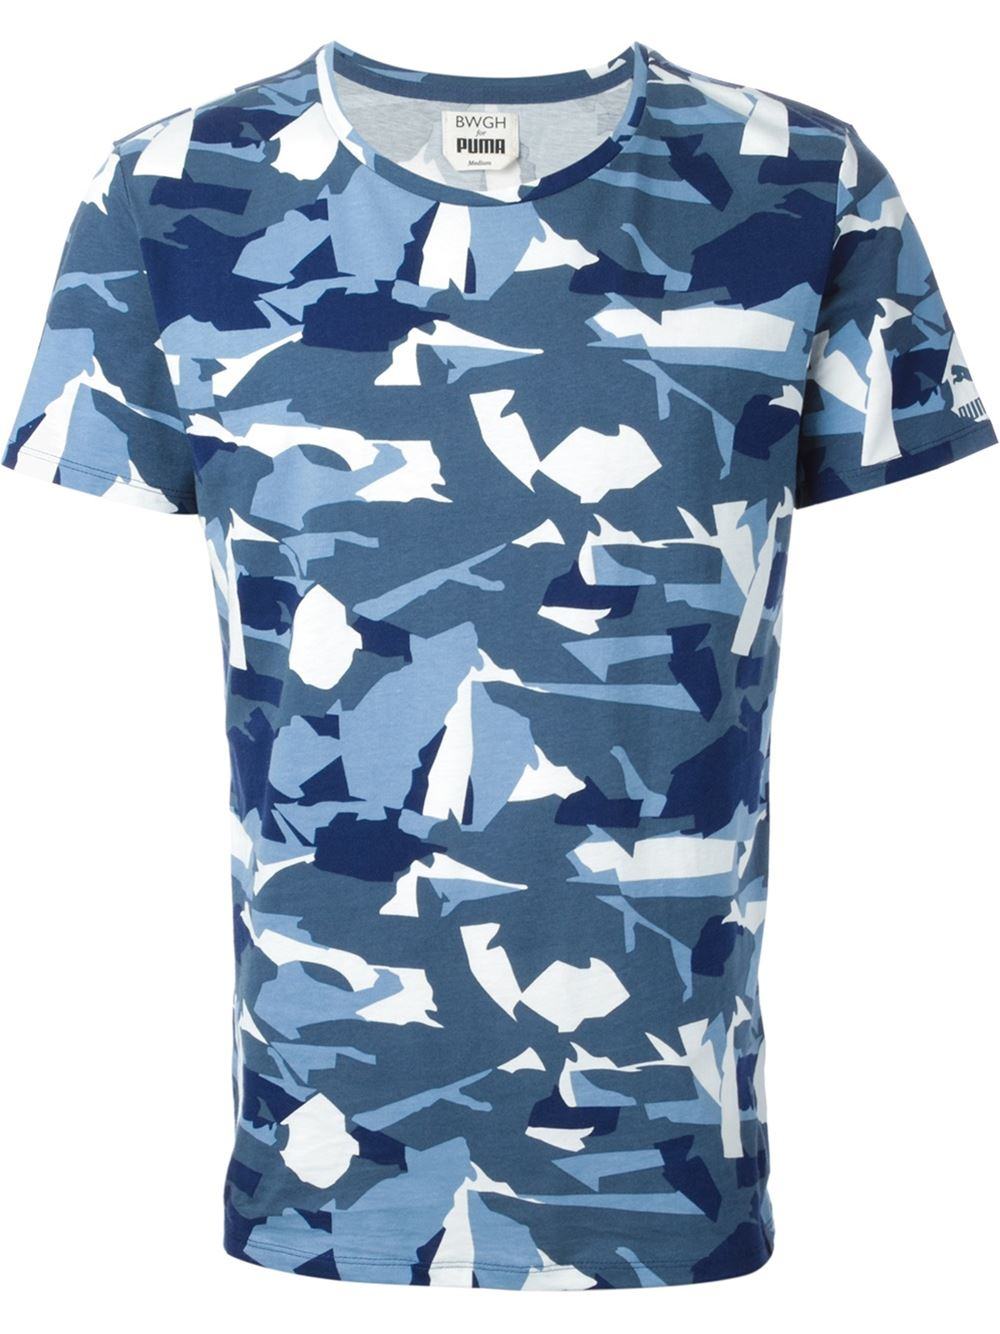 PUMA Bwgh Camouflage T-Shirt in Blue for Men - Lyst